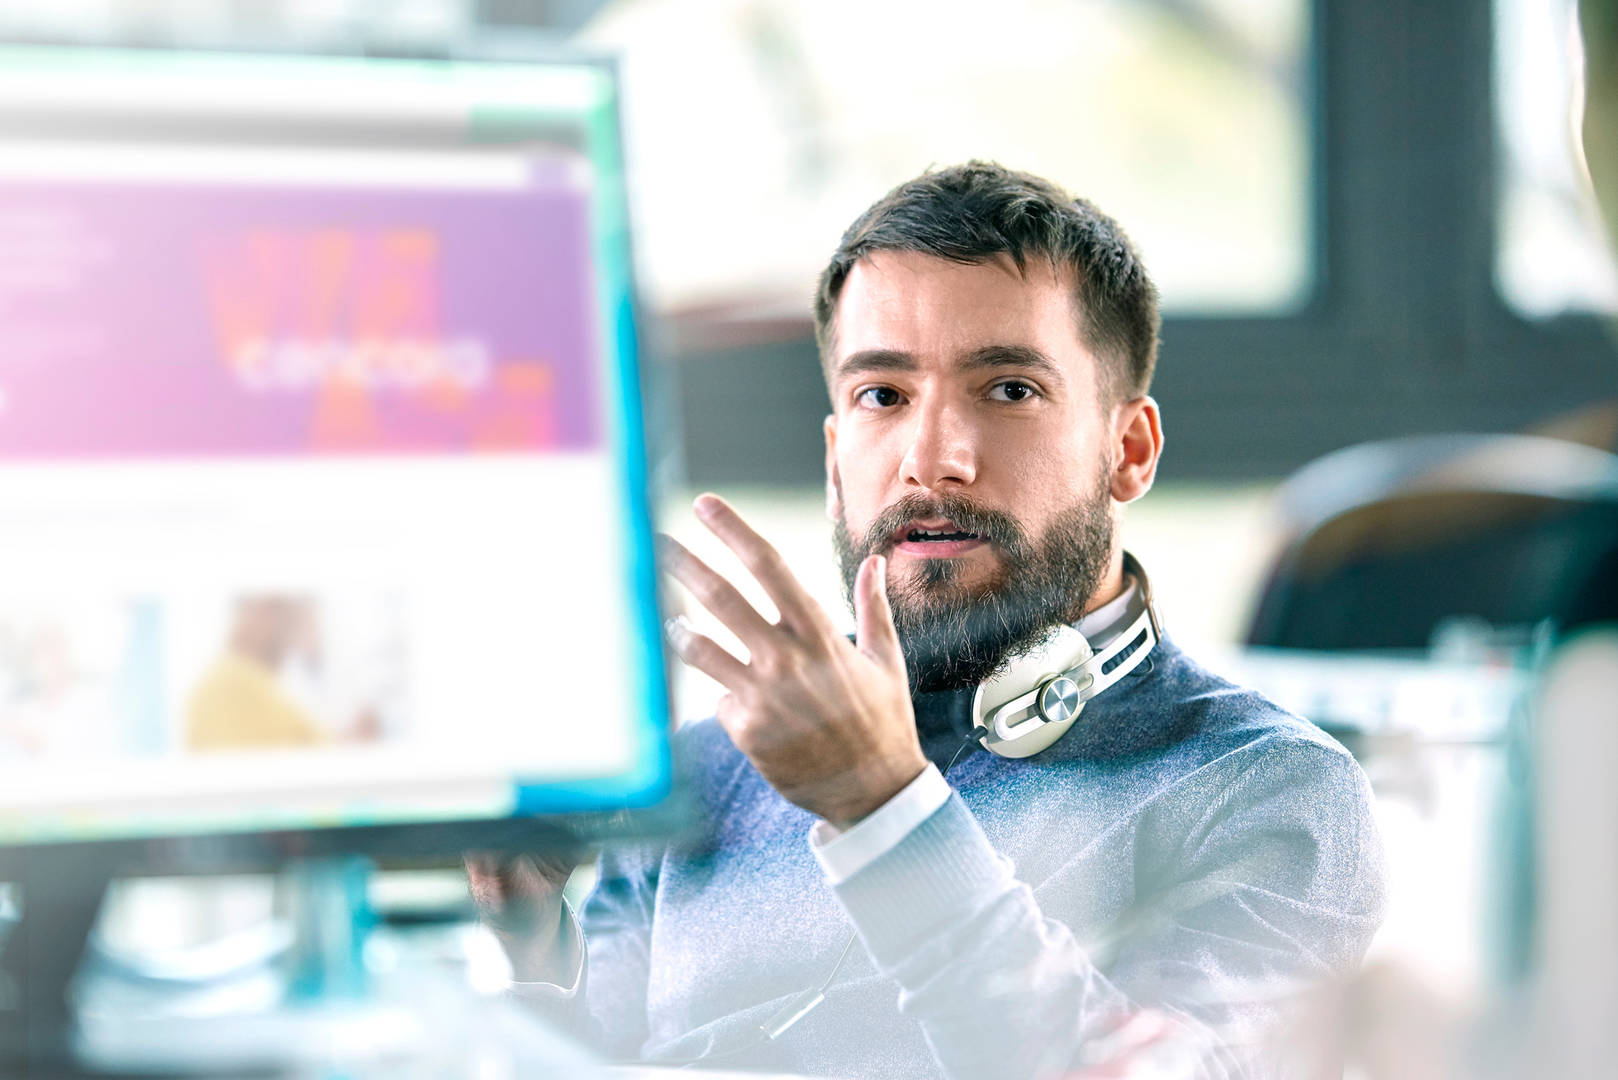 Man with beard and headphones sitting in front of computer in office